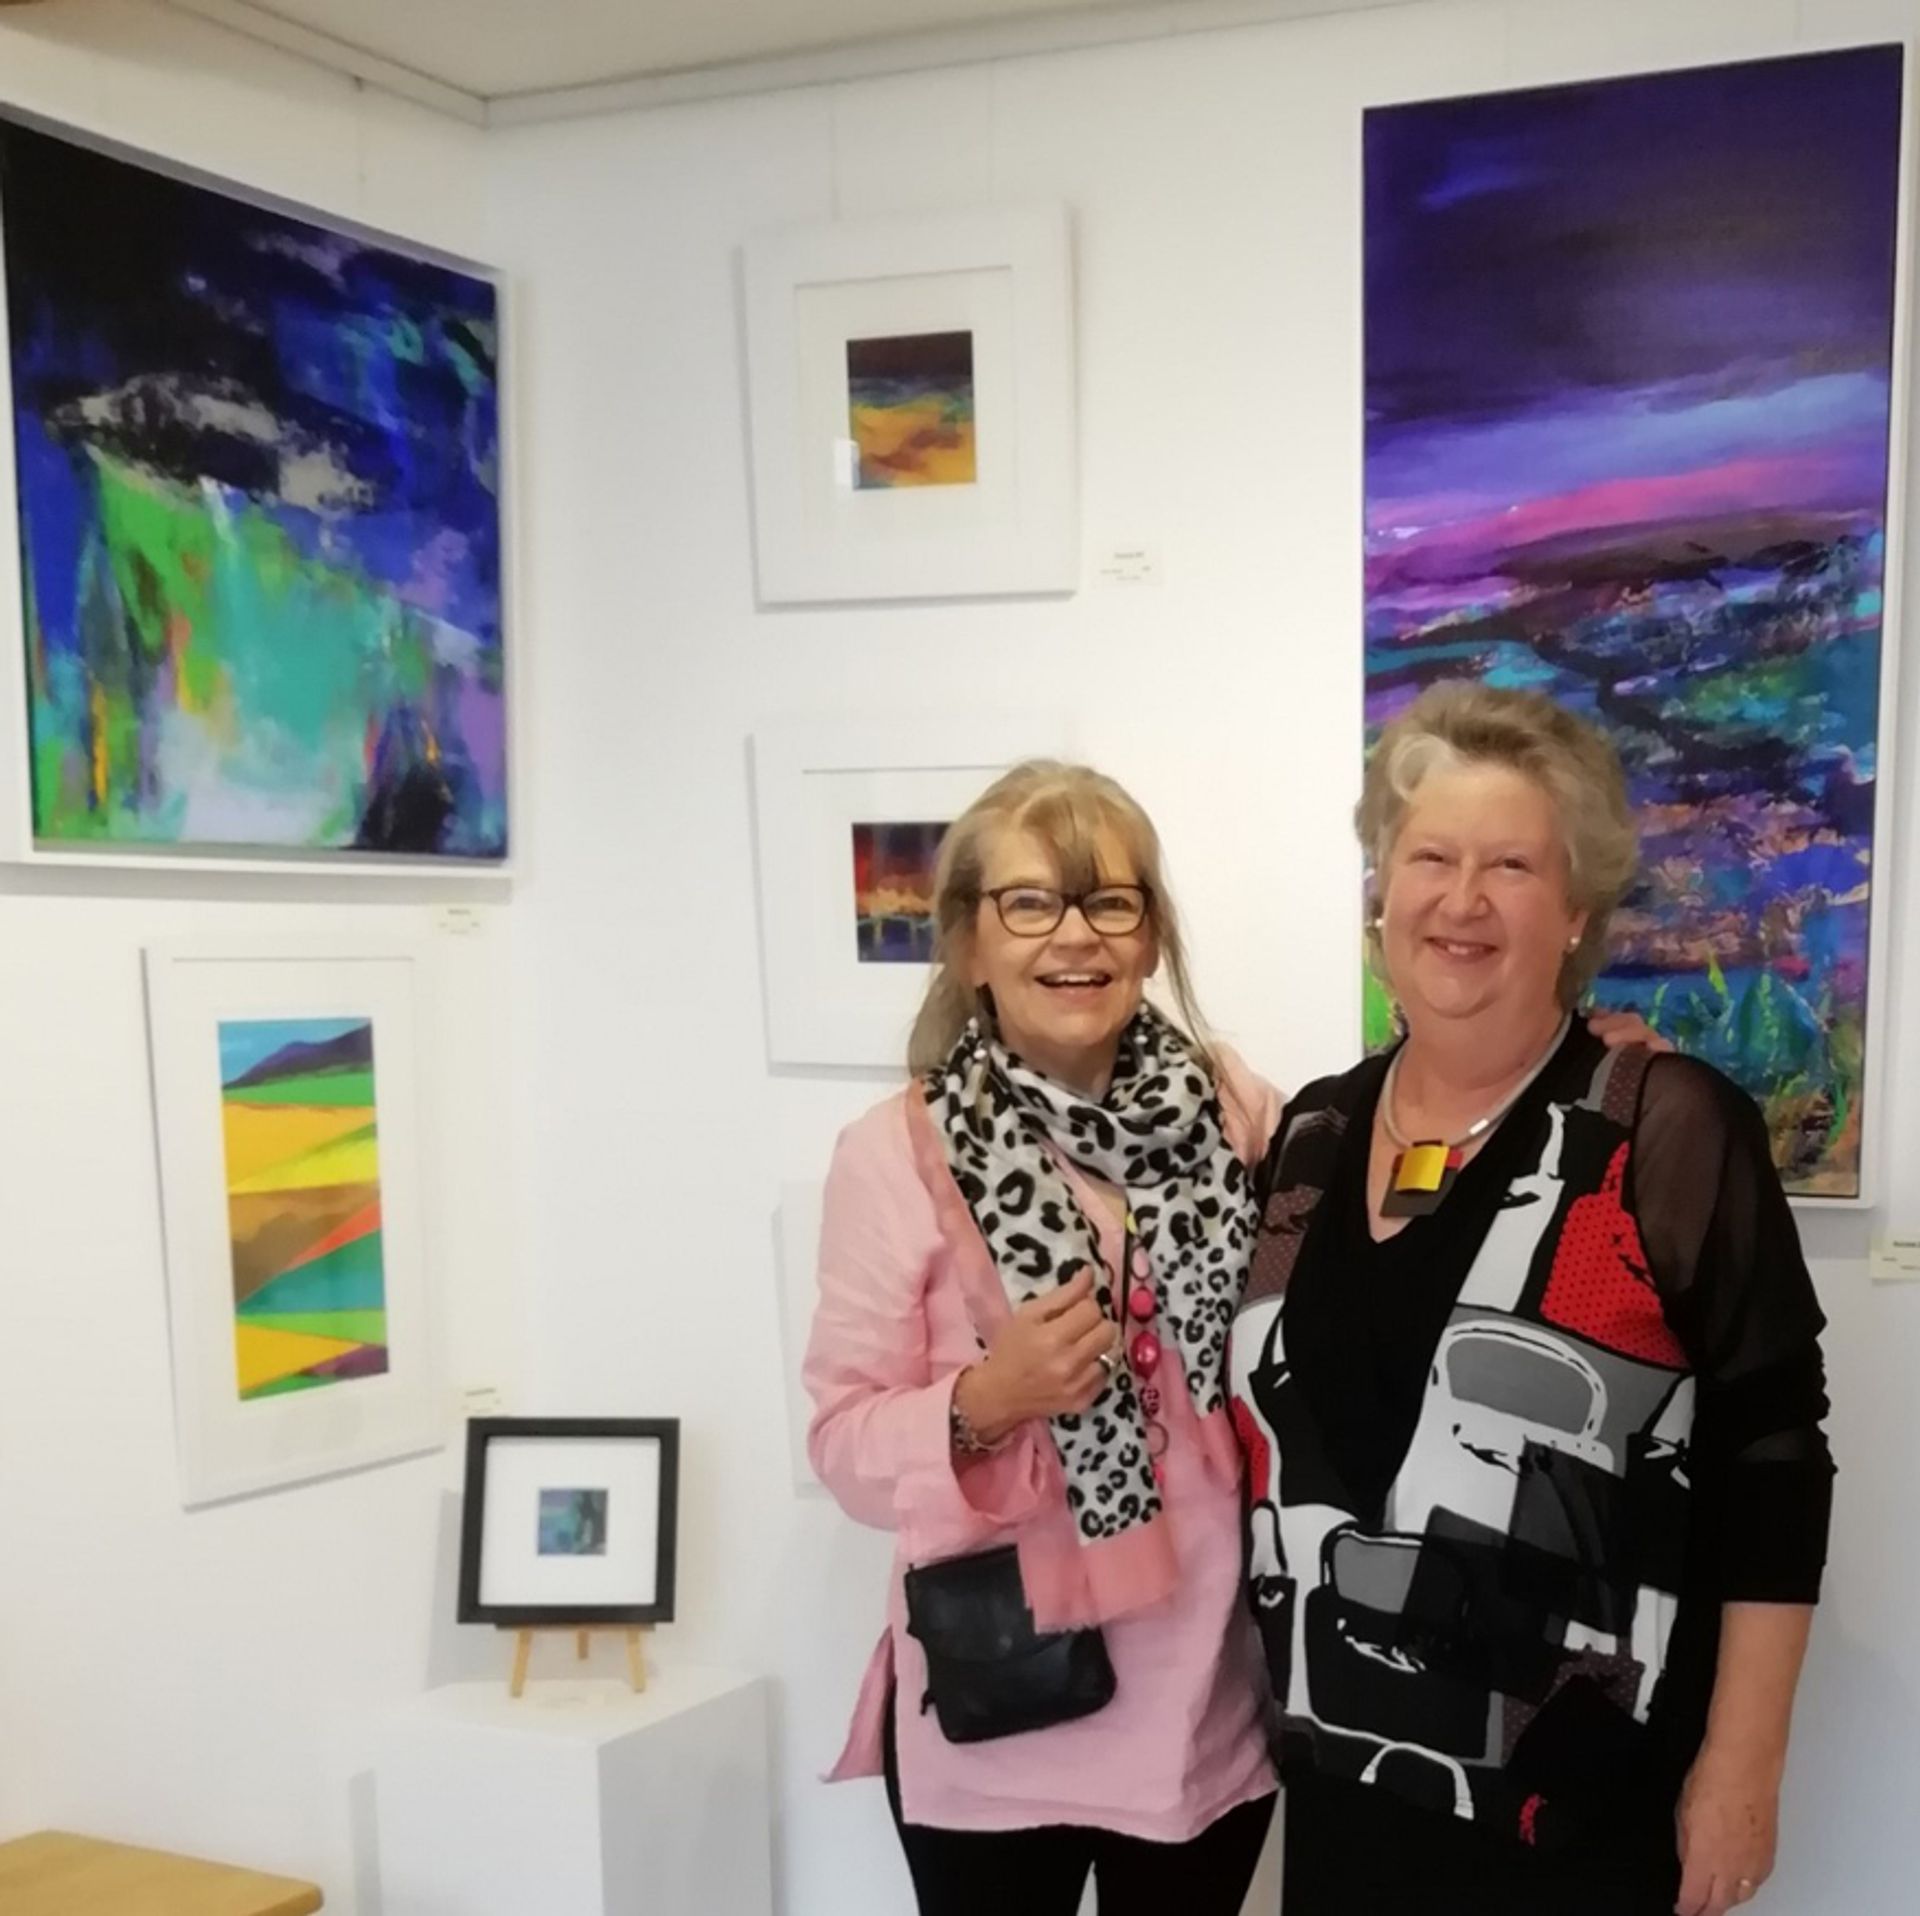  'Colour and Light' Art Exhibition at Number 8